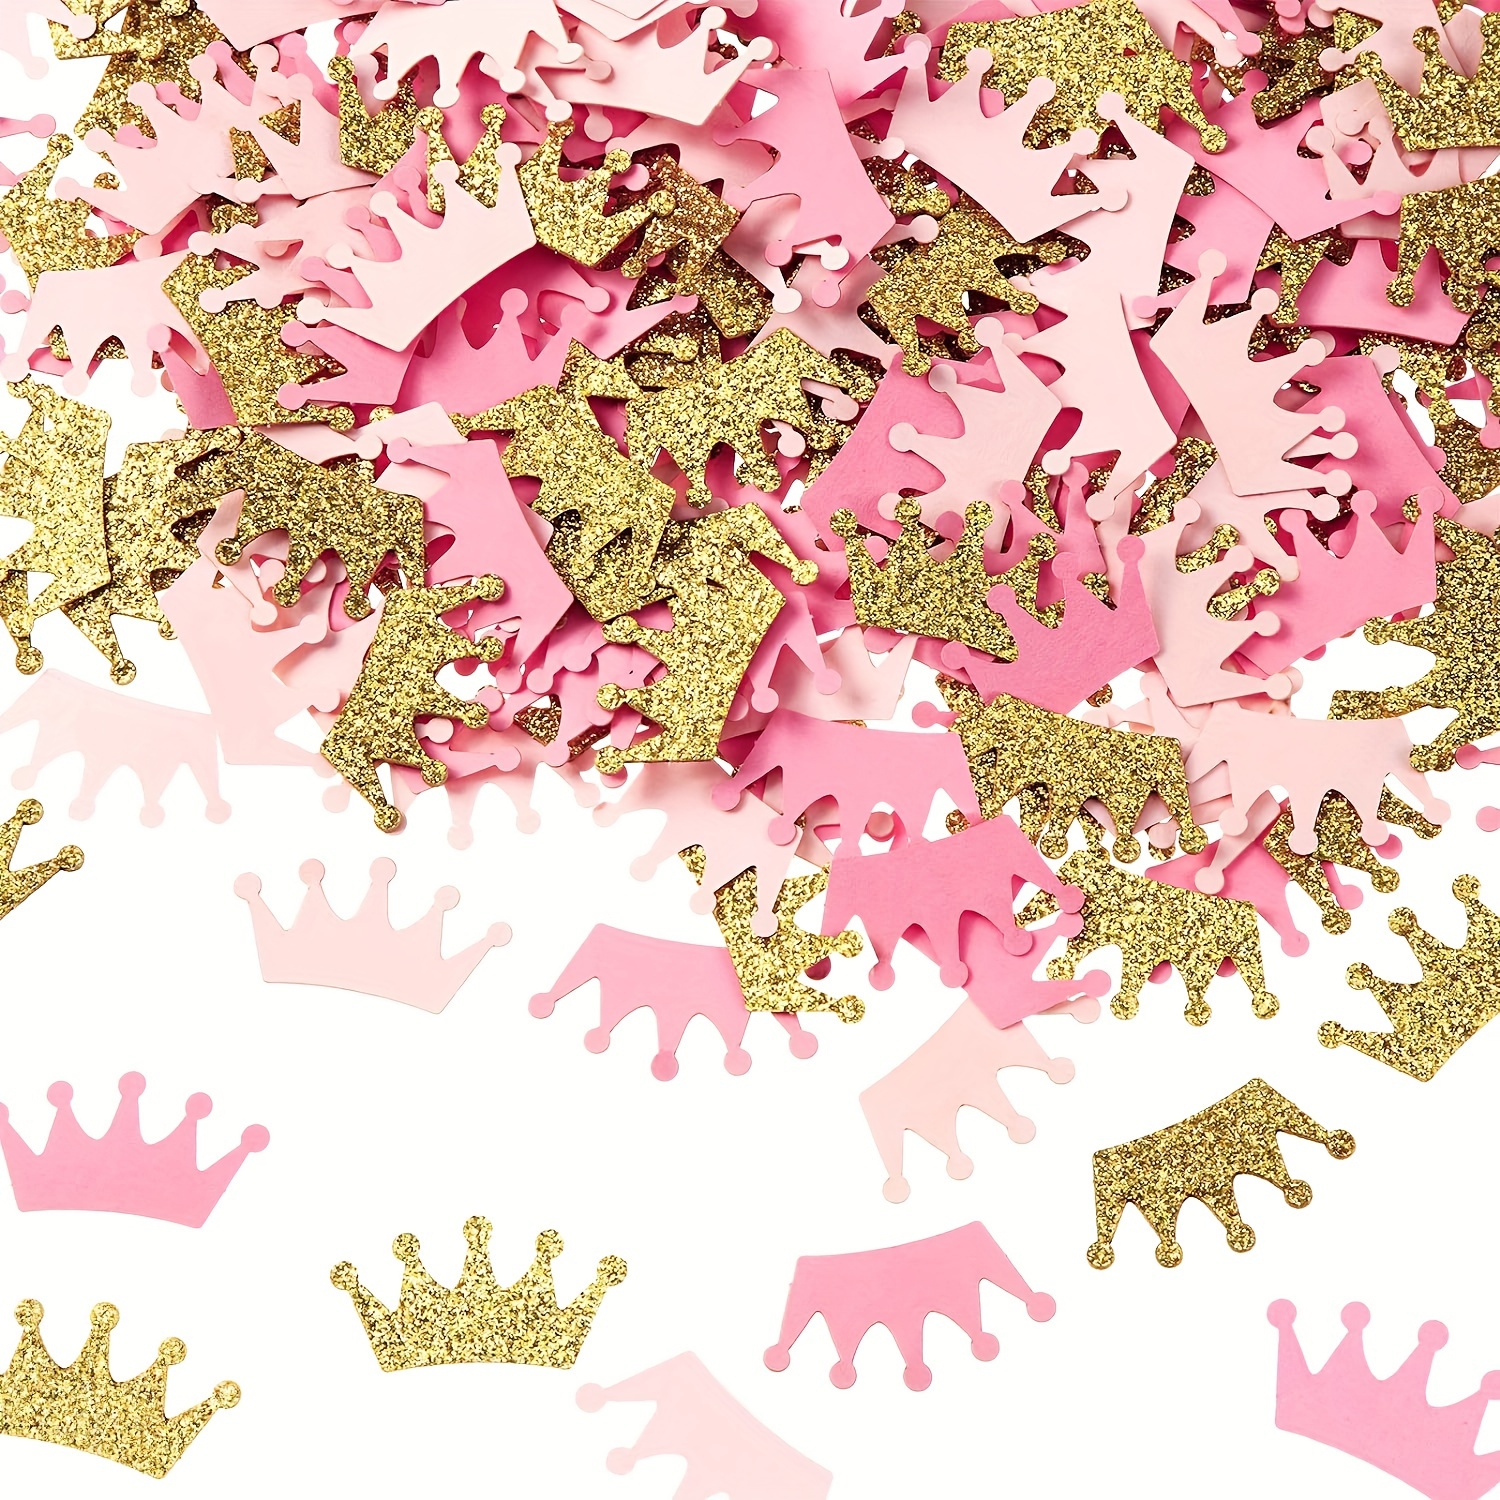 

300-piece Sparkling Crown Confetti - Perfect For Birthday, Baptism & Party Decorations, Glittery Prince King Theme